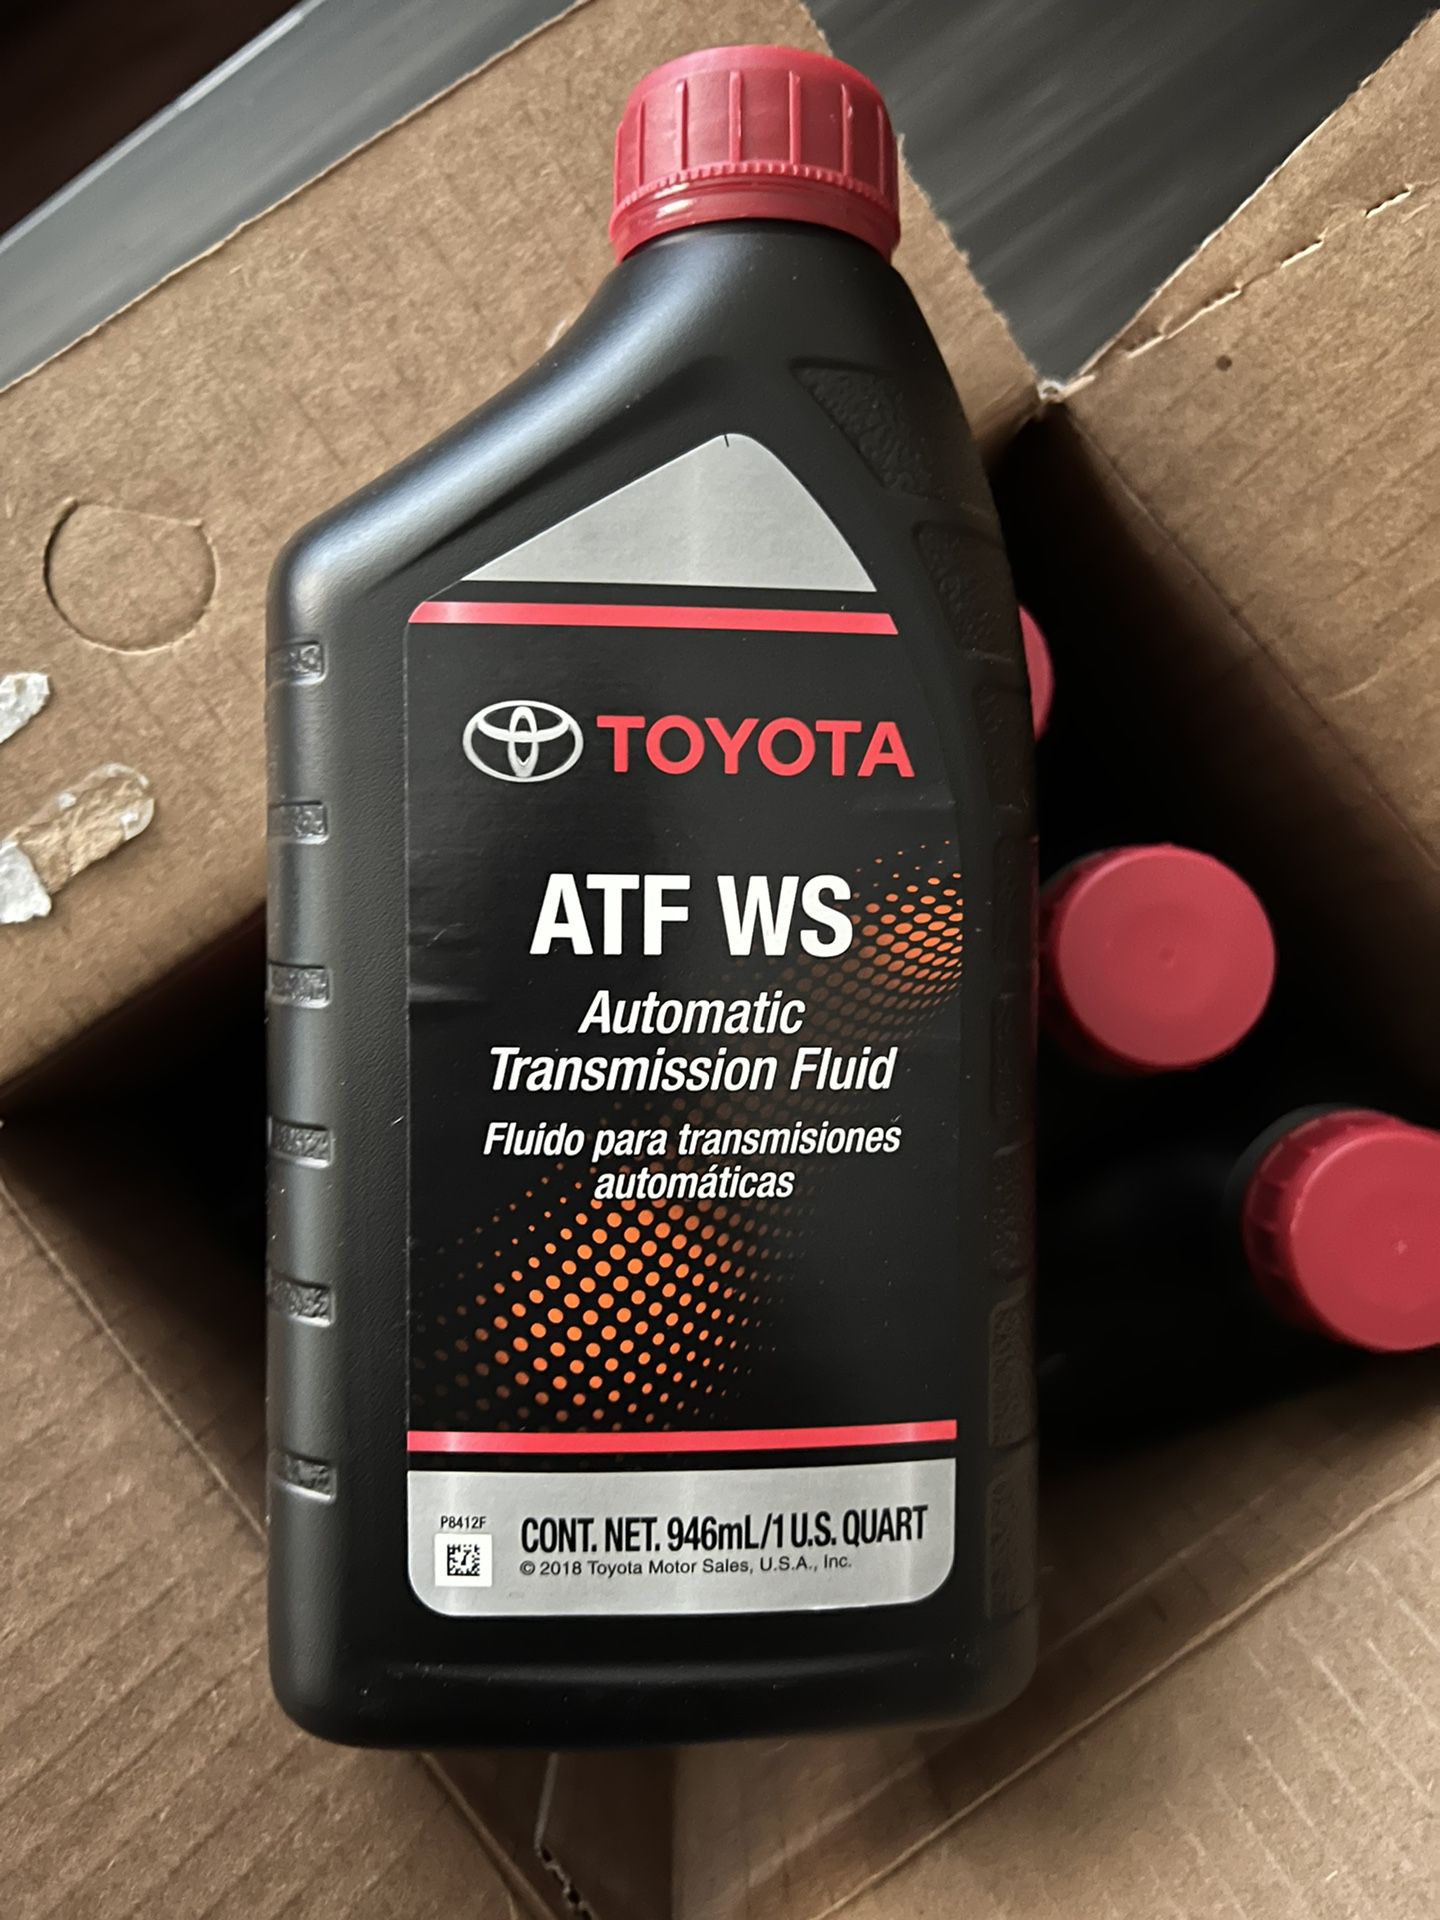 Global Transmission Fluid WS ATF+4 Synthetic Mercon V Mercon LV 6 Quarts  for Sale in Bloomington, CA - OfferUp